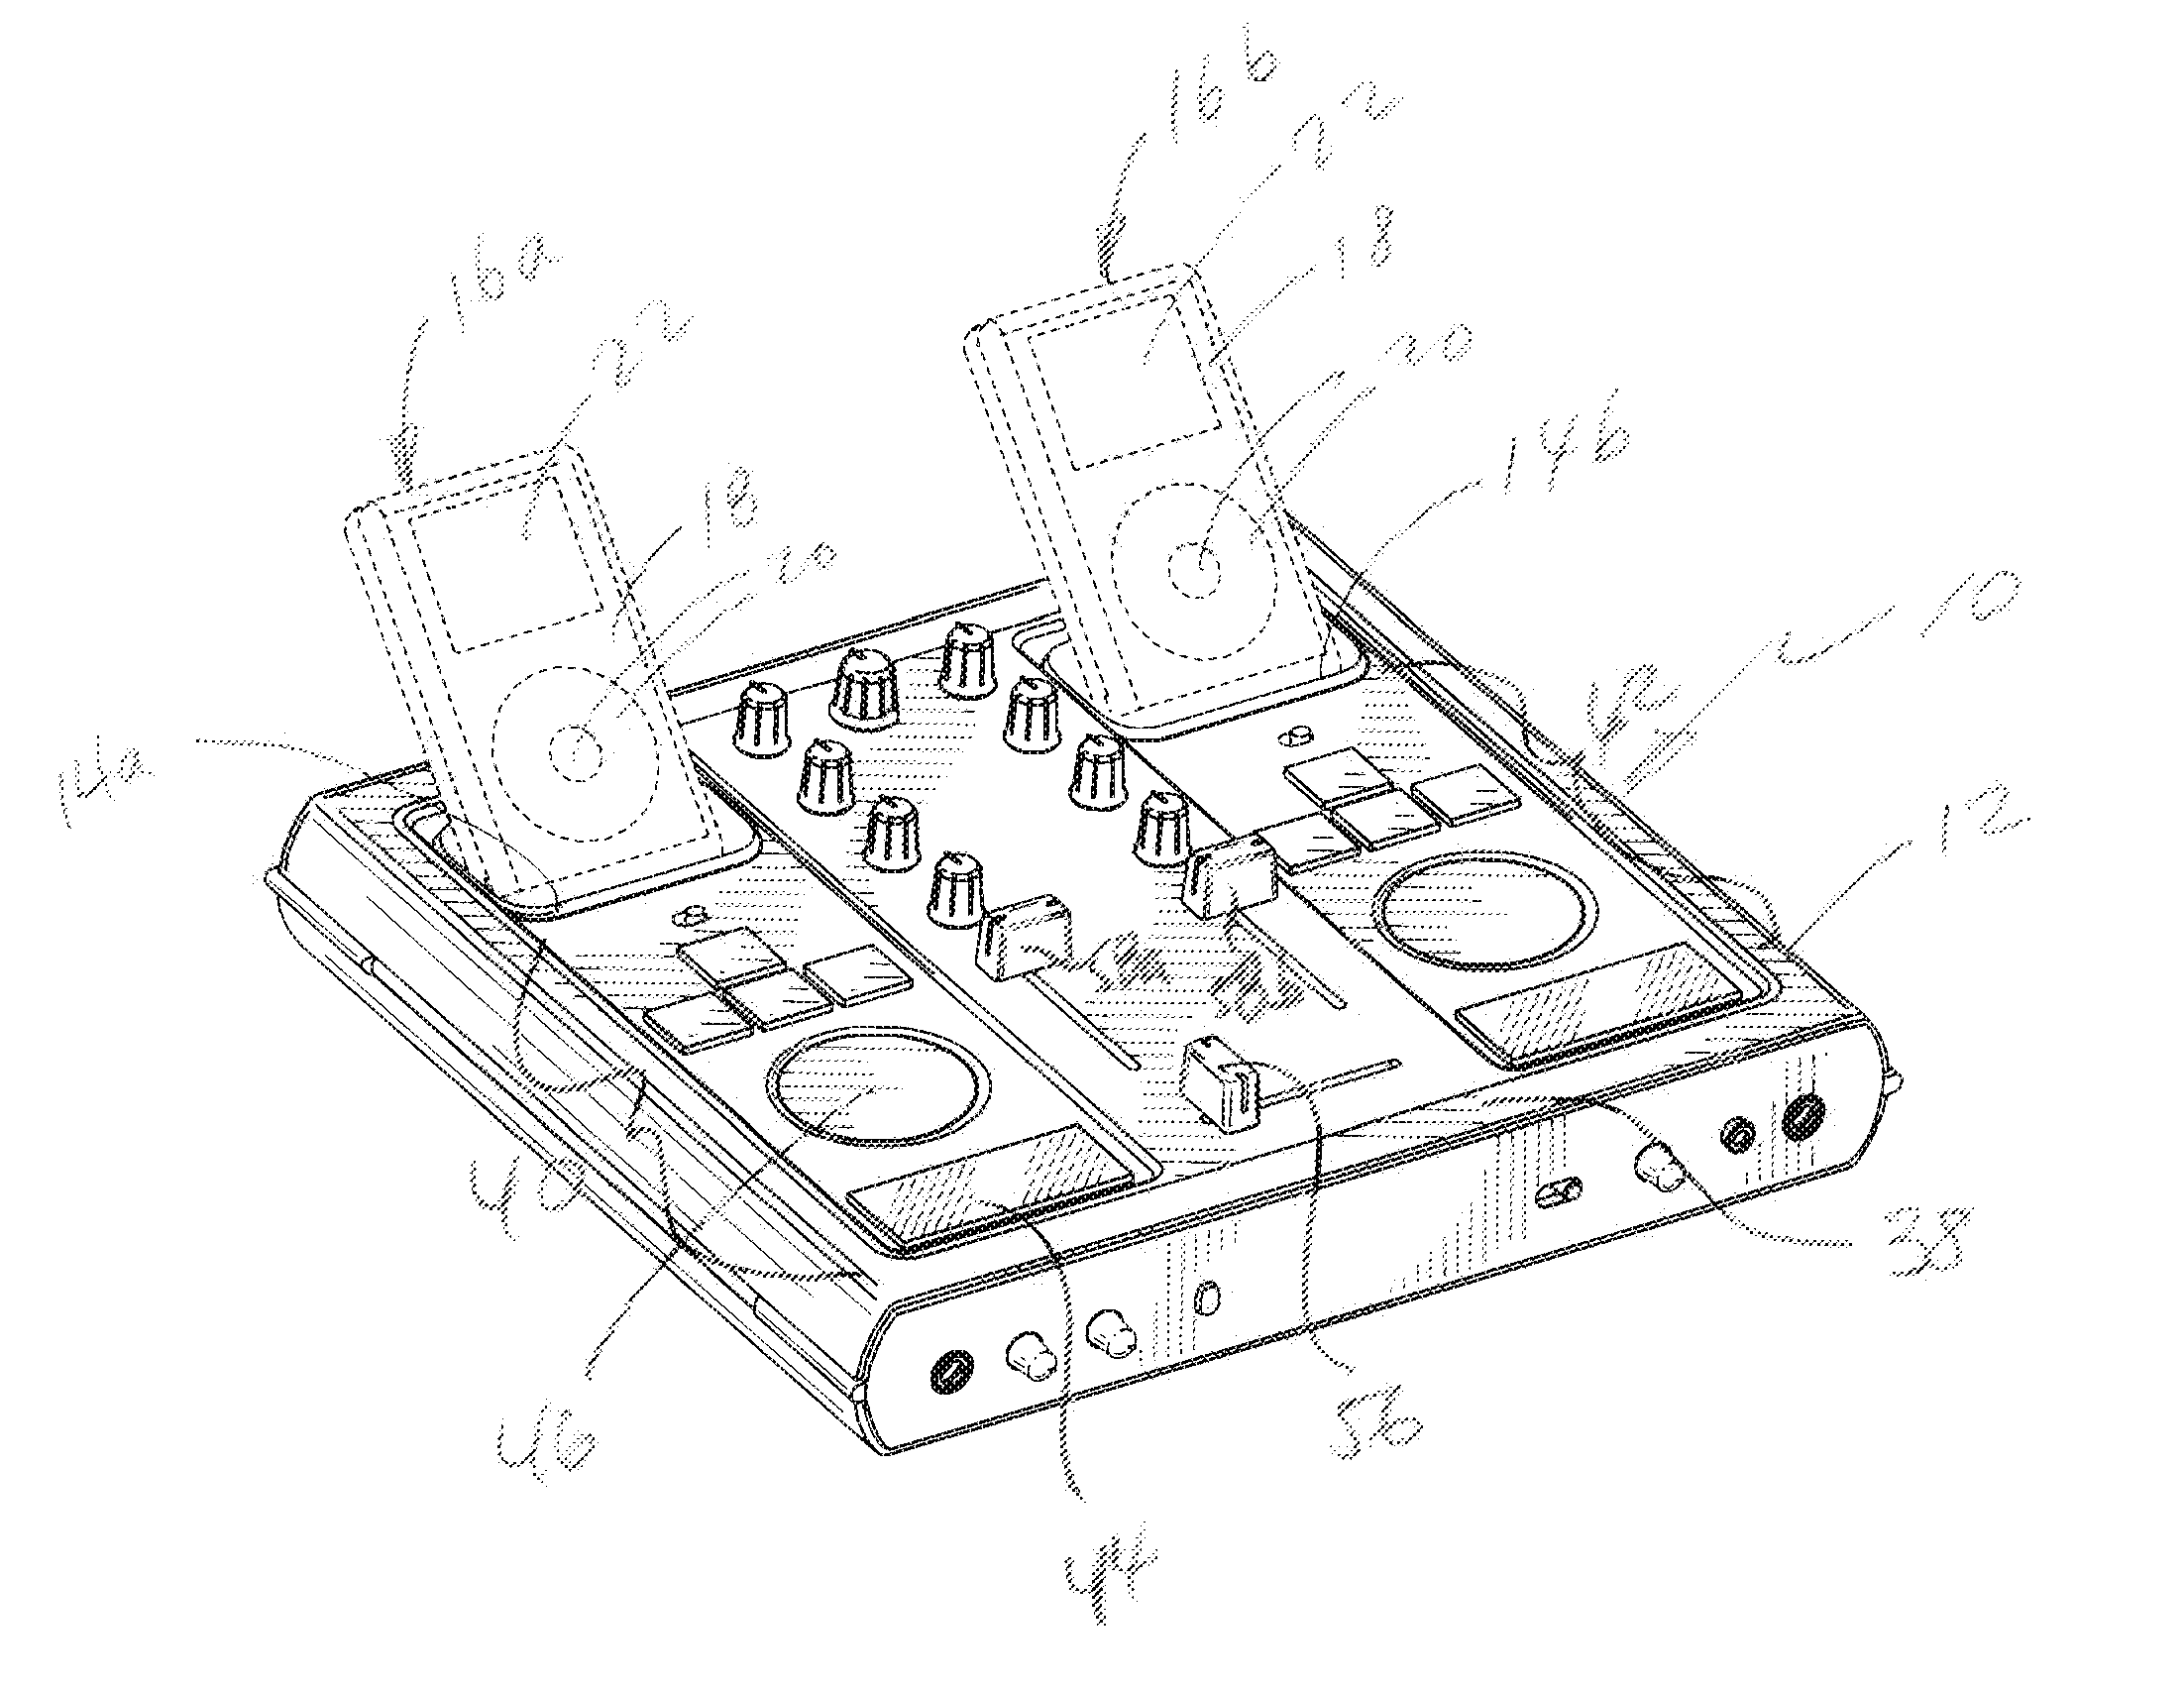 Docking apparatus and mixer for portable media devices